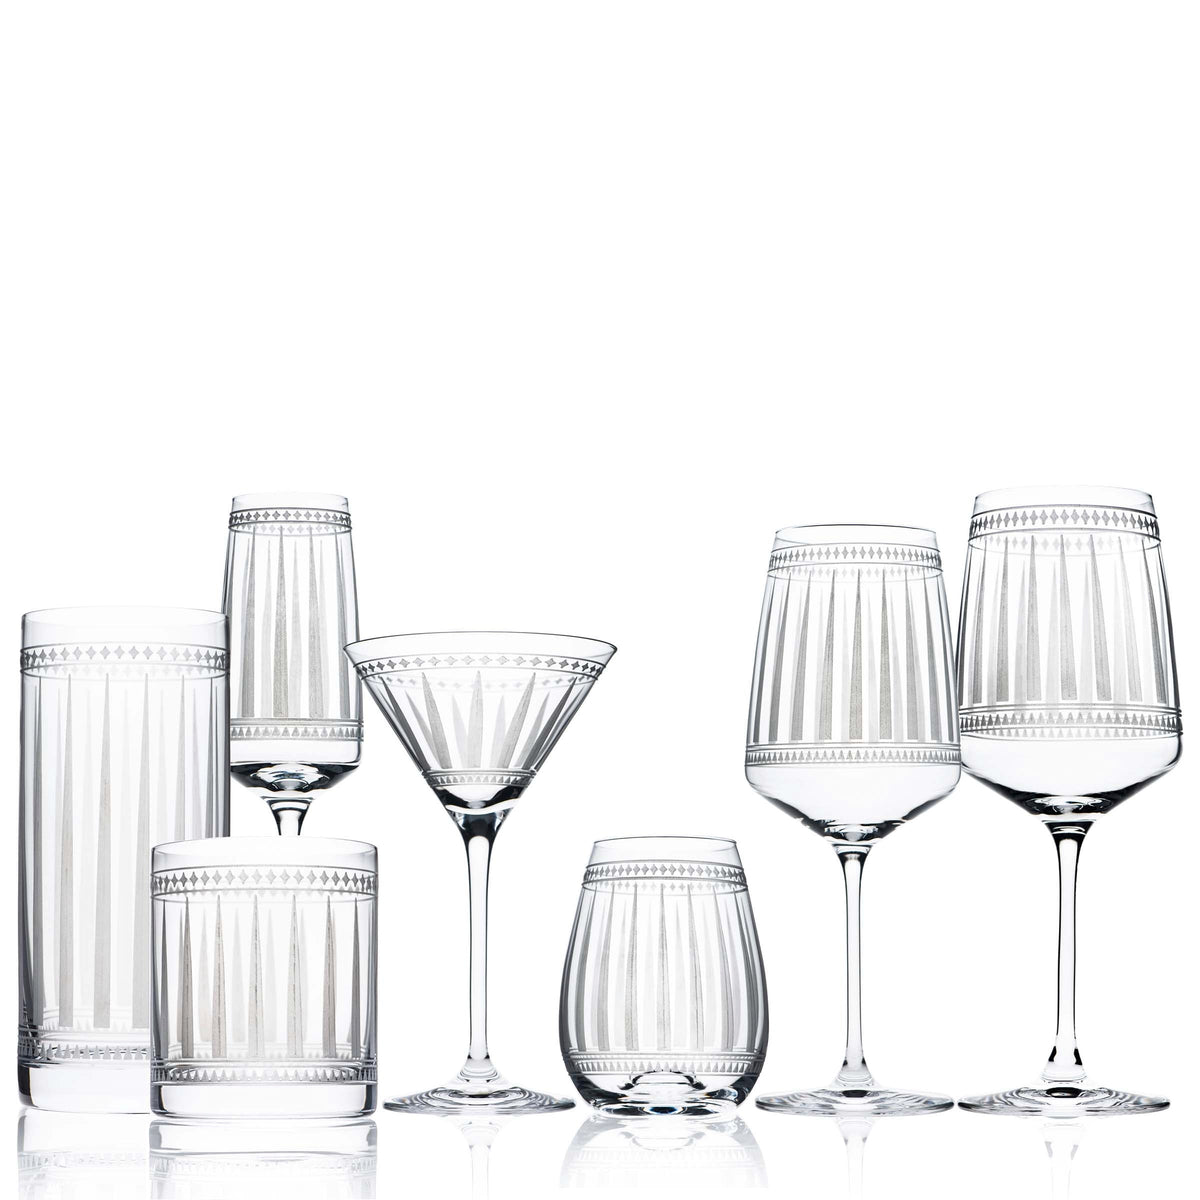 A set of Marrakech Highball Glasses with a white background by Caskata Artisanal Home.